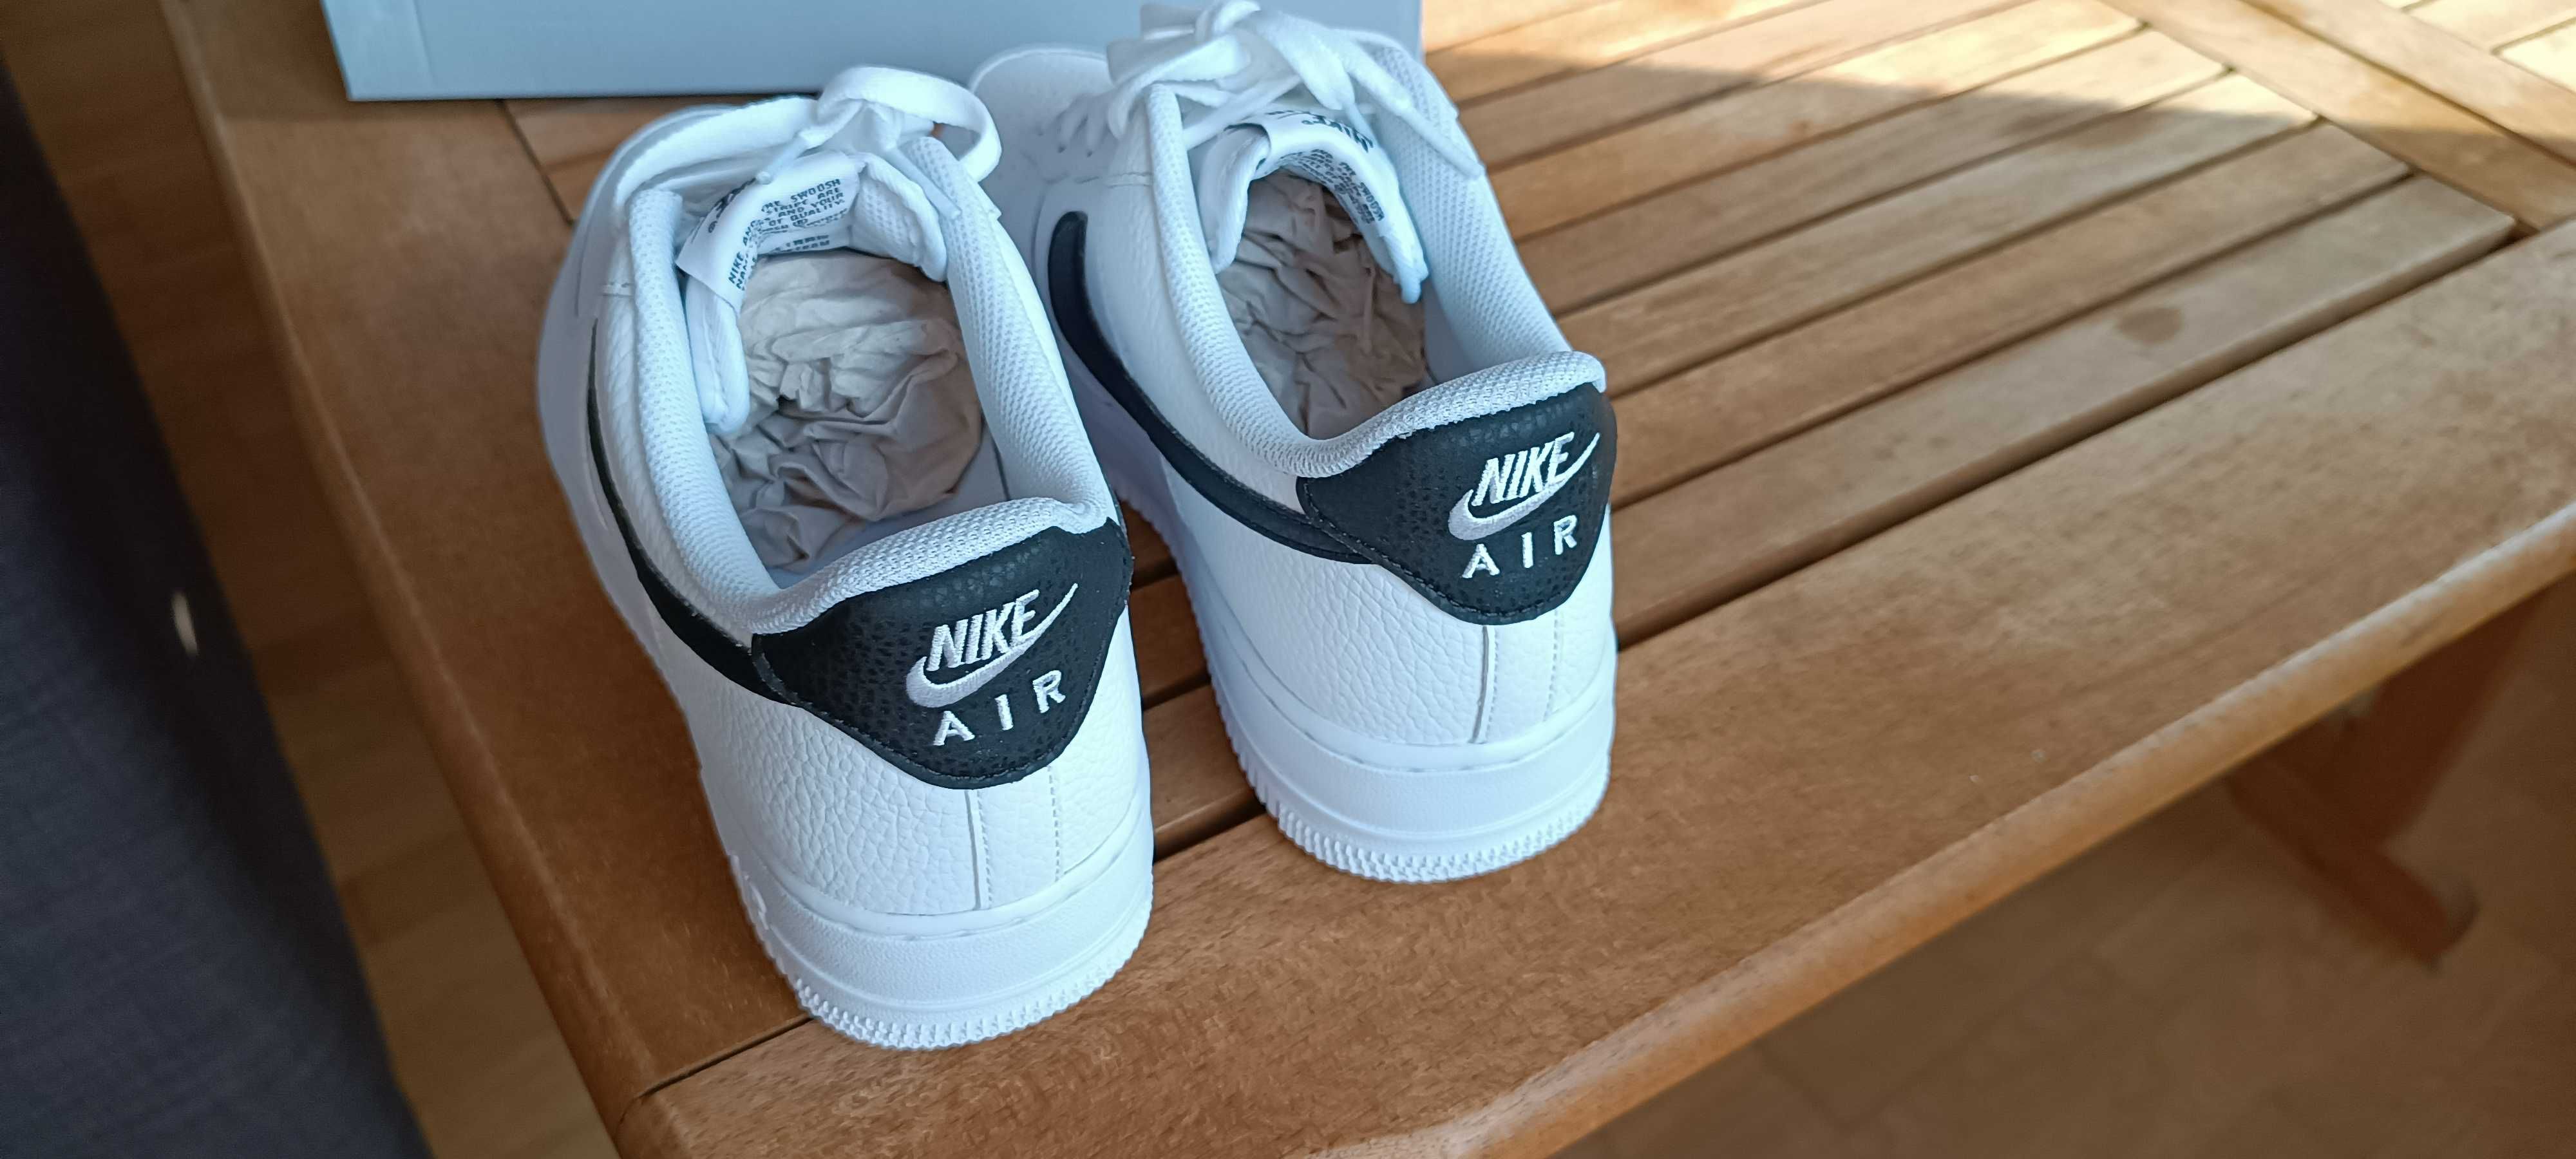 r. 43 Nike Air Force 1 Low '07 White Black Pebbled Leather CT2302,-100